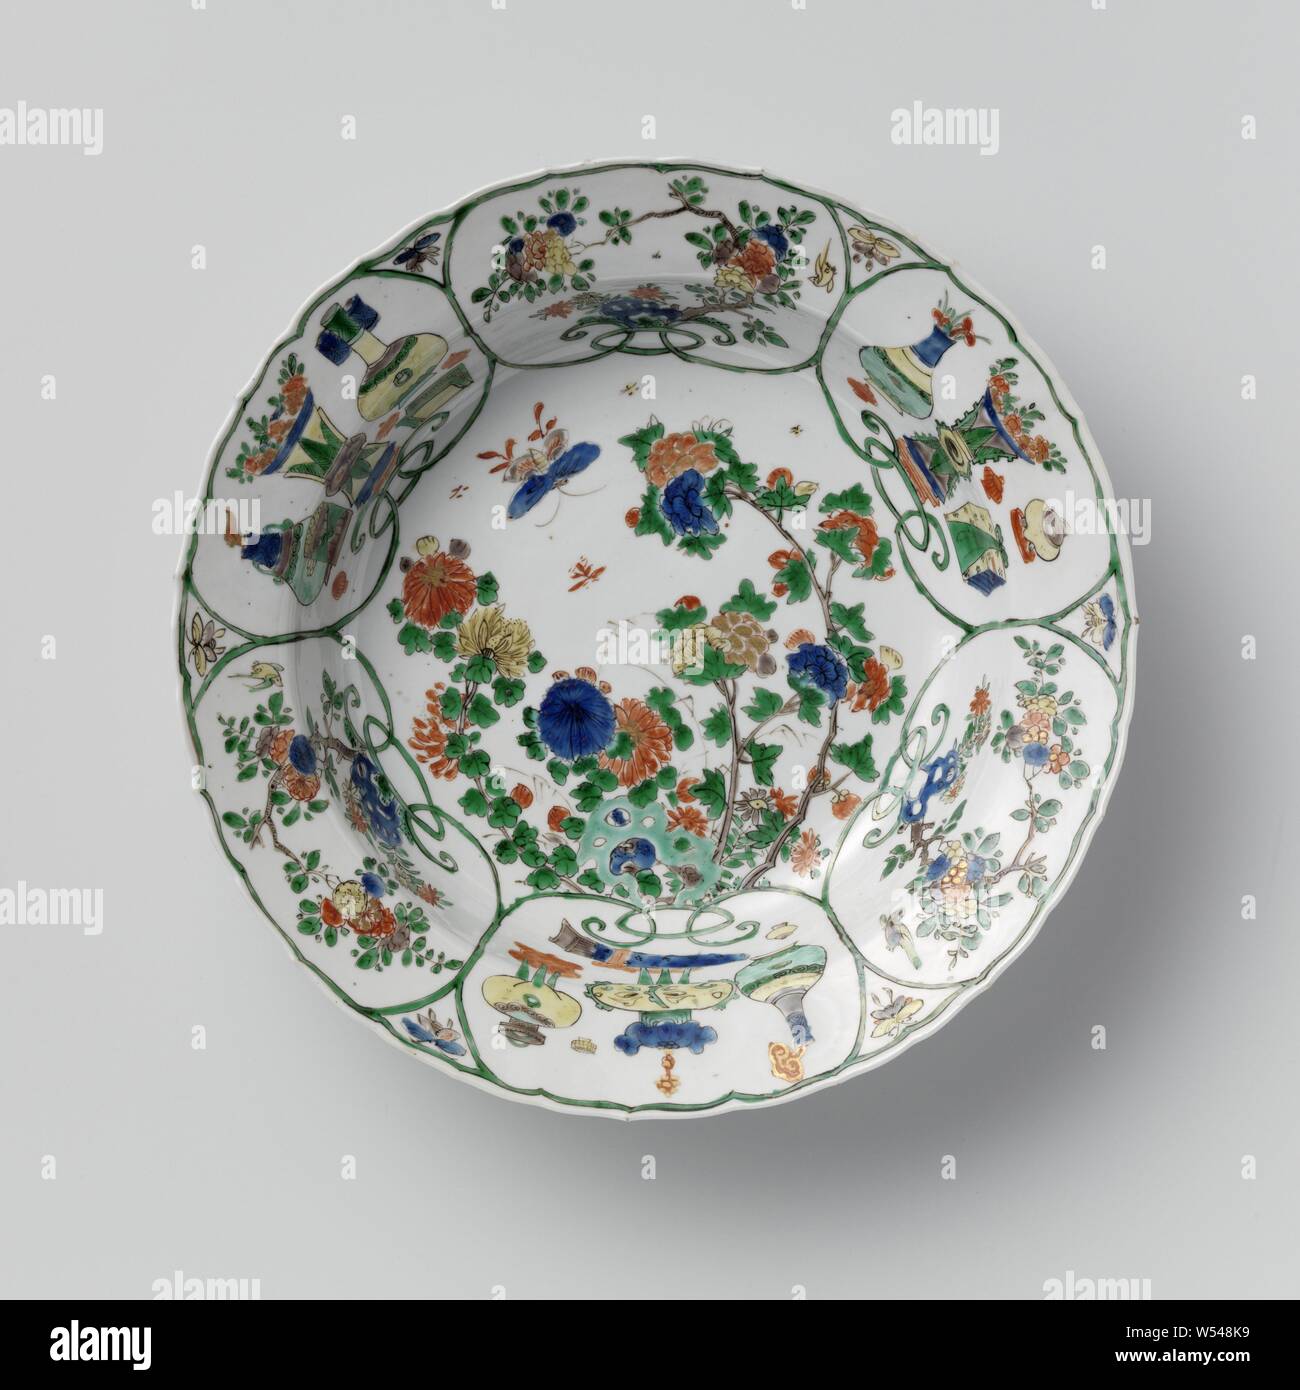 Deep dish with flowering plants near a rock and antiquities, Deep dish of porcelain, painted in blue, red, green, yellow, eggplant, black and gold. On the flat flowering plants (peony, chrysanthemum) and a butterfly near a rock. Six cartouches on the wall and border with alternating flowering plants near a rock and antiques (flower vase, tripod, incense burner, ruyi scepter, books). The outer edge with four flower tendrils, the outer wall is divided into four compartments with a ruyi motif. Marked on the bottom with 'Yù' in a double circle. Famille verte., anonymous, China, c. 1700 - c. 1724 Stock Photo